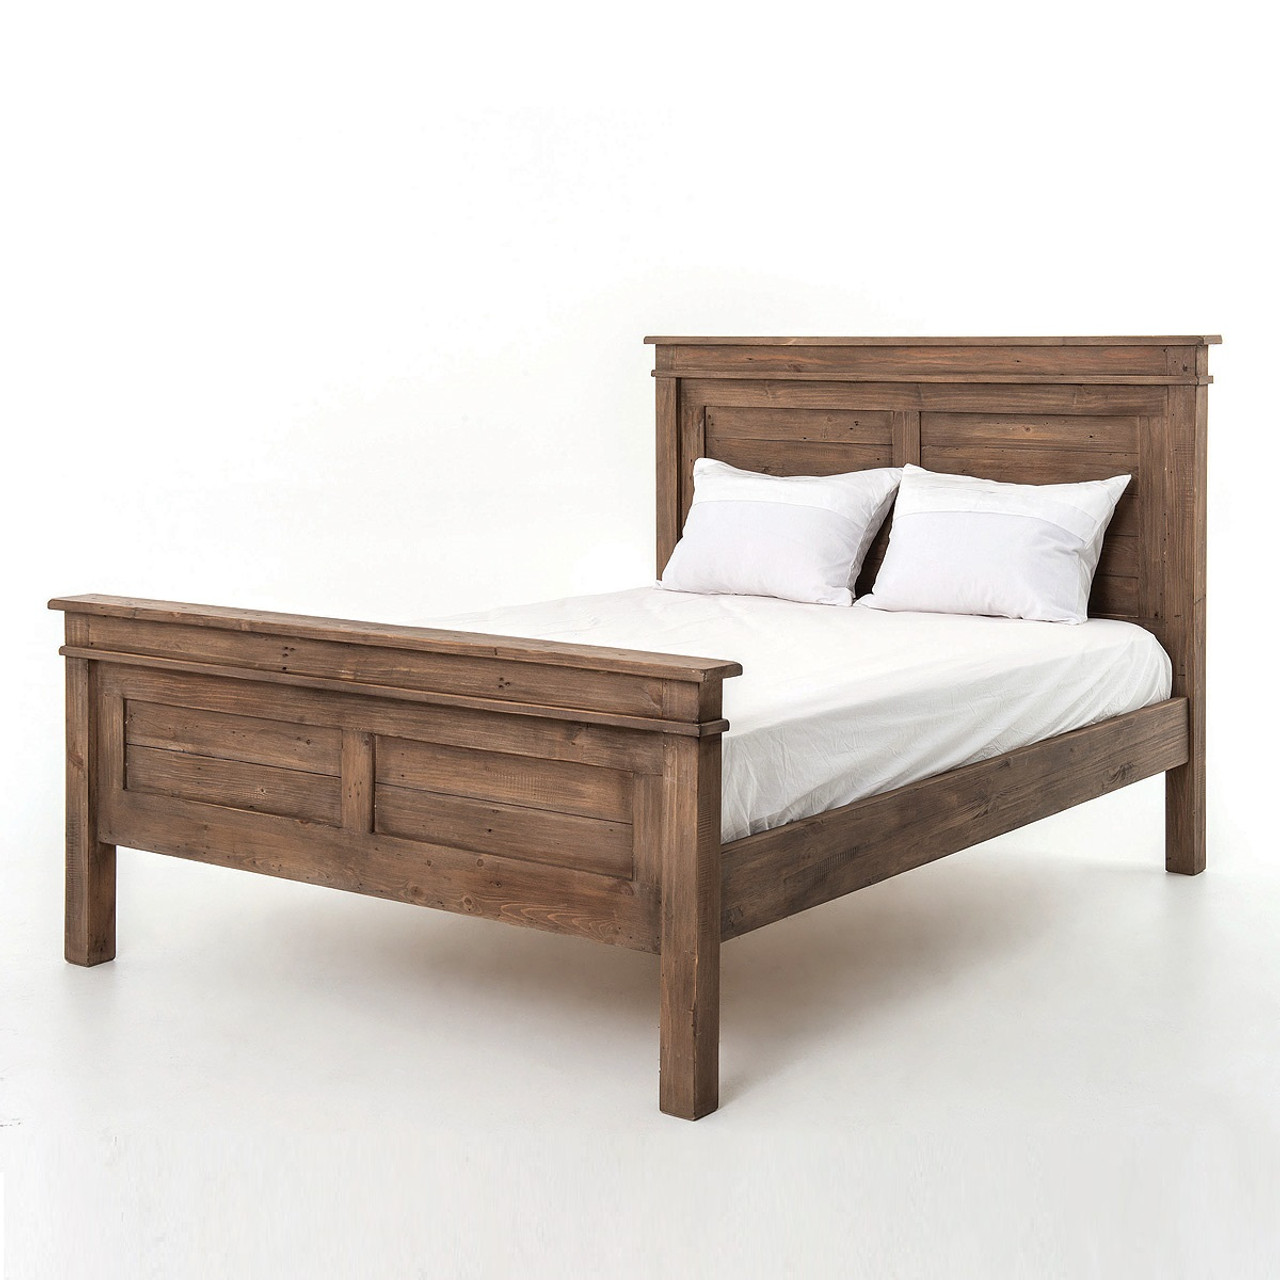 Featured image of post Queen Size Wooden Platform Bed Frame : The term slats, when used separately from the rest of the bedframe, usually refers to removable wooden (or plastic) slats that run side to side between the side rails of a bed frame that is made of either.